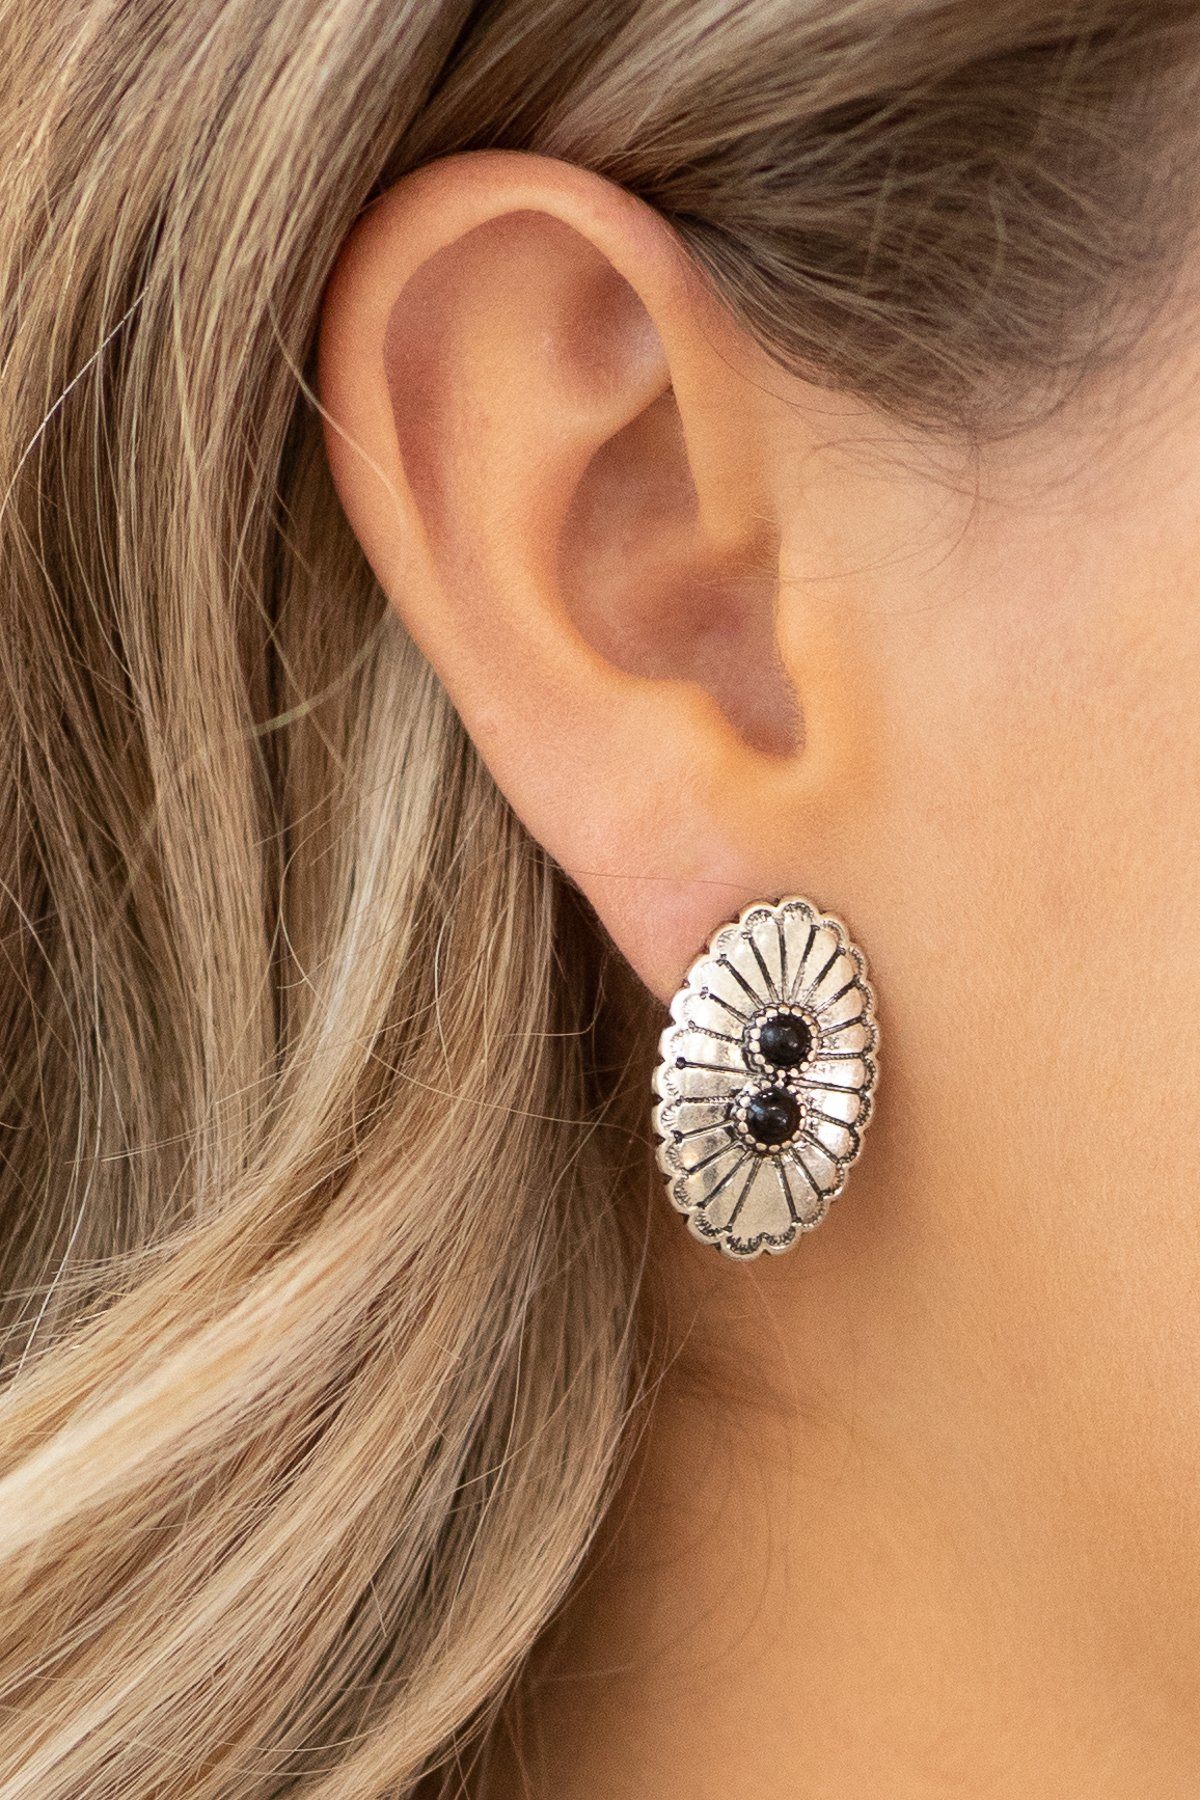 Silver and Black Oval Stud Earrings - Filly Flair